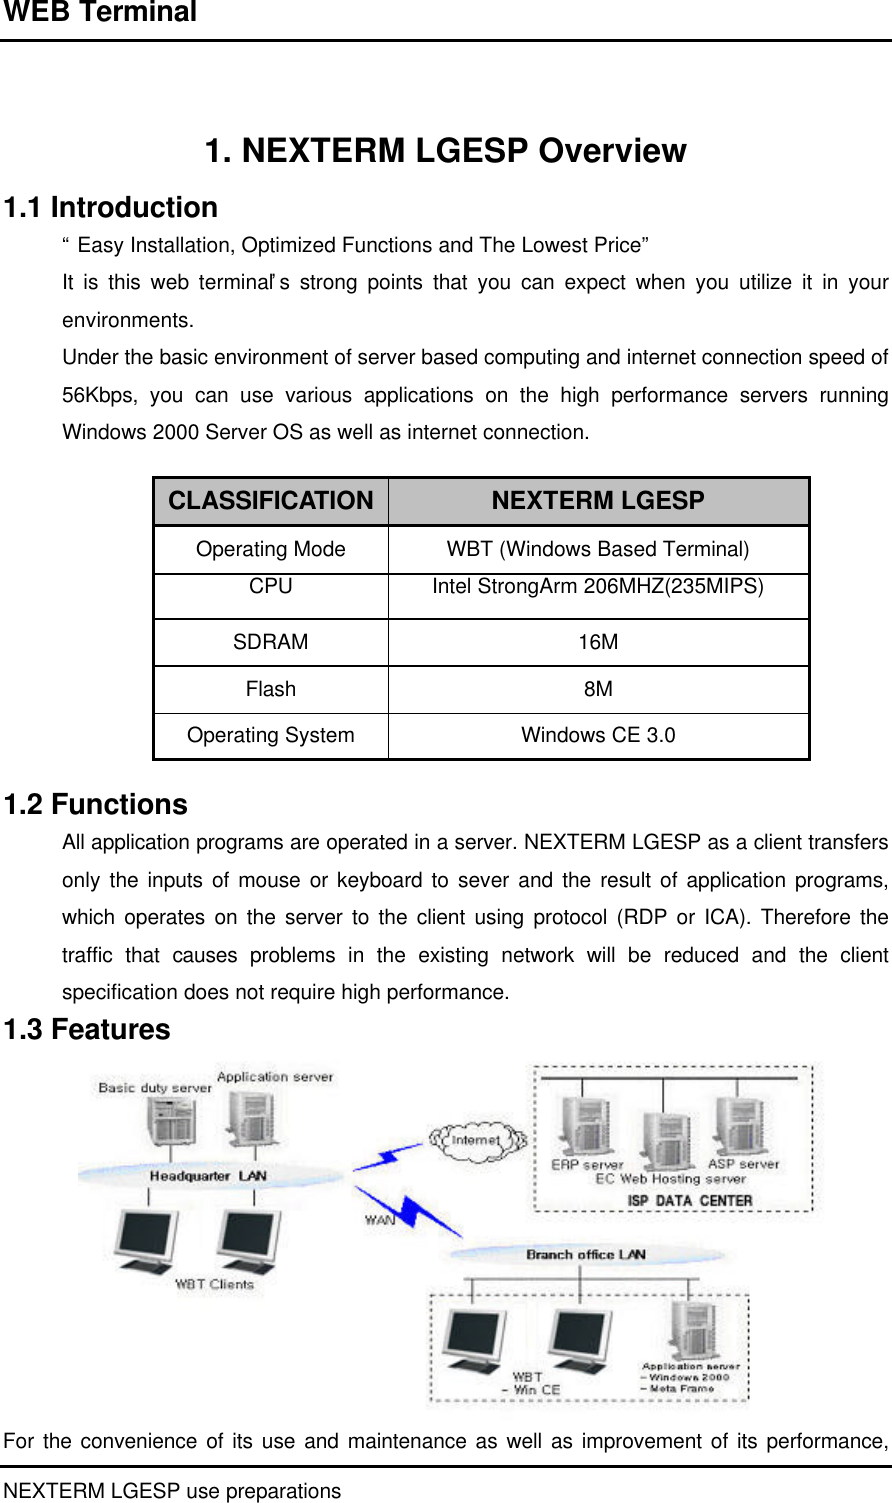 WEB Terminal NEXTERM LGESP use preparations    1. NEXTERM LGESP Overview 1.1 Introduction “ Easy Installation, Optimized Functions and The Lowest Price”  It is this web terminal’ s strong points that you can expect when you utilize it in your environments.  Under the basic environment of server based computing and internet connection speed of 56Kbps, you can use various applications on the high performance servers running Windows 2000 Server OS as well as internet connection.   CLASSIFICATION NEXTERM LGESP Operating Mode WBT (Windows Based Terminal) CPU Intel StrongArm 206MHZ(235MIPS) SDRAM 16M Flash 8M Operating System Windows CE 3.0  1.2 Functions All application programs are operated in a server. NEXTERM LGESP as a client transfers only the inputs of mouse or keyboard to sever and the result of application programs, which operates on the server to the client using protocol (RDP or ICA). Therefore the traffic that causes problems in the existing network will be reduced and the client specification does not require high performance.   1.3 Features For the convenience of its use and maintenance as well as improvement of its performance, 